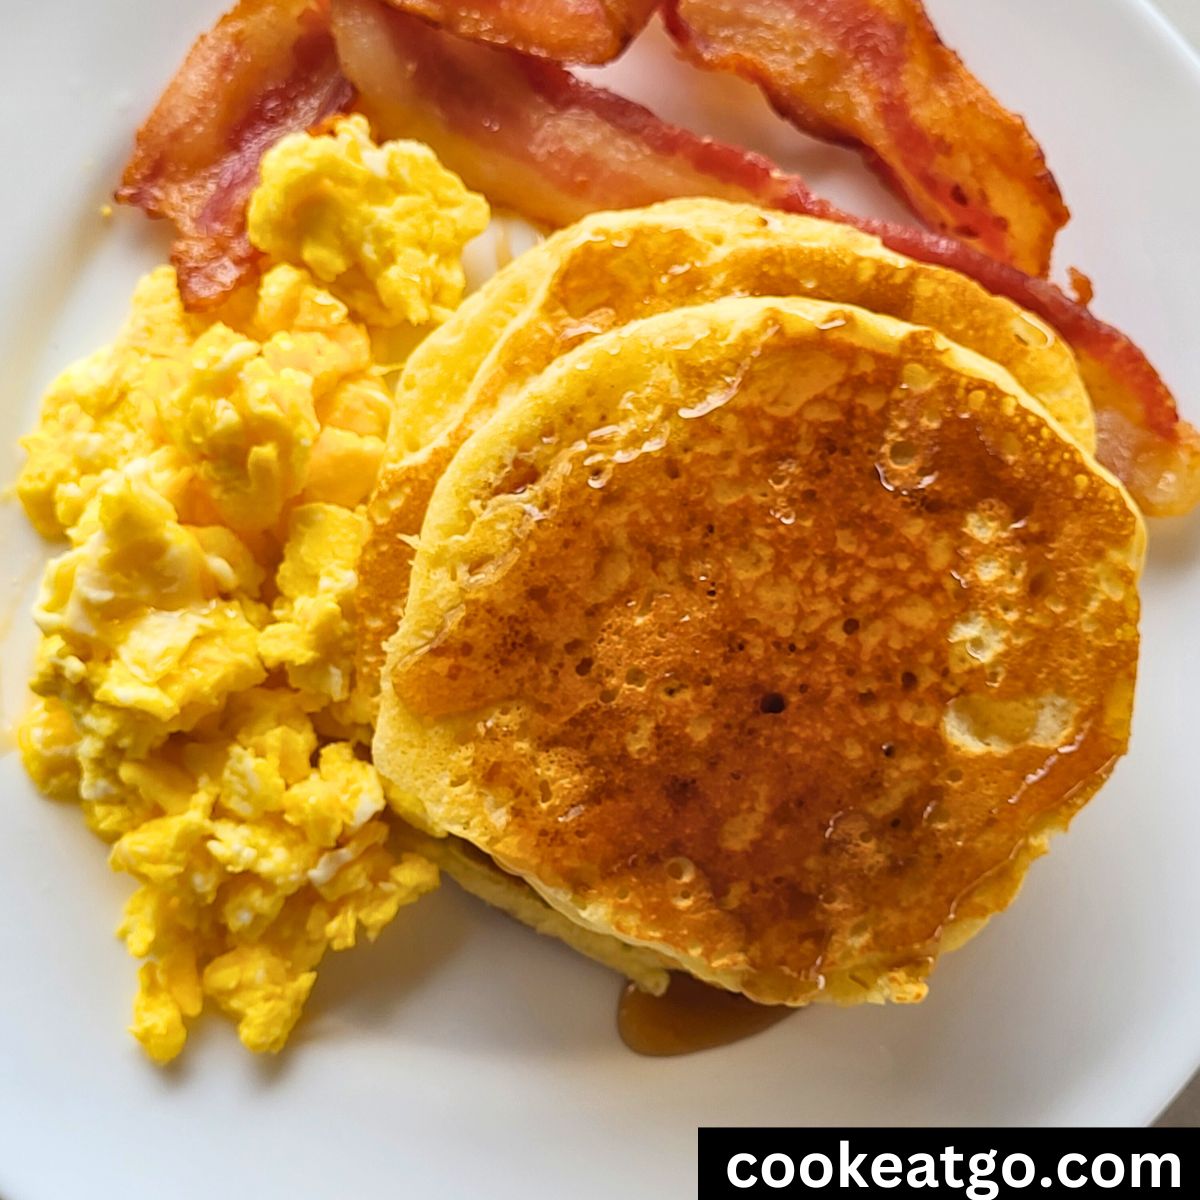 fluffy pancakes topped with syrup served with eggs and cooked bacon on a plate